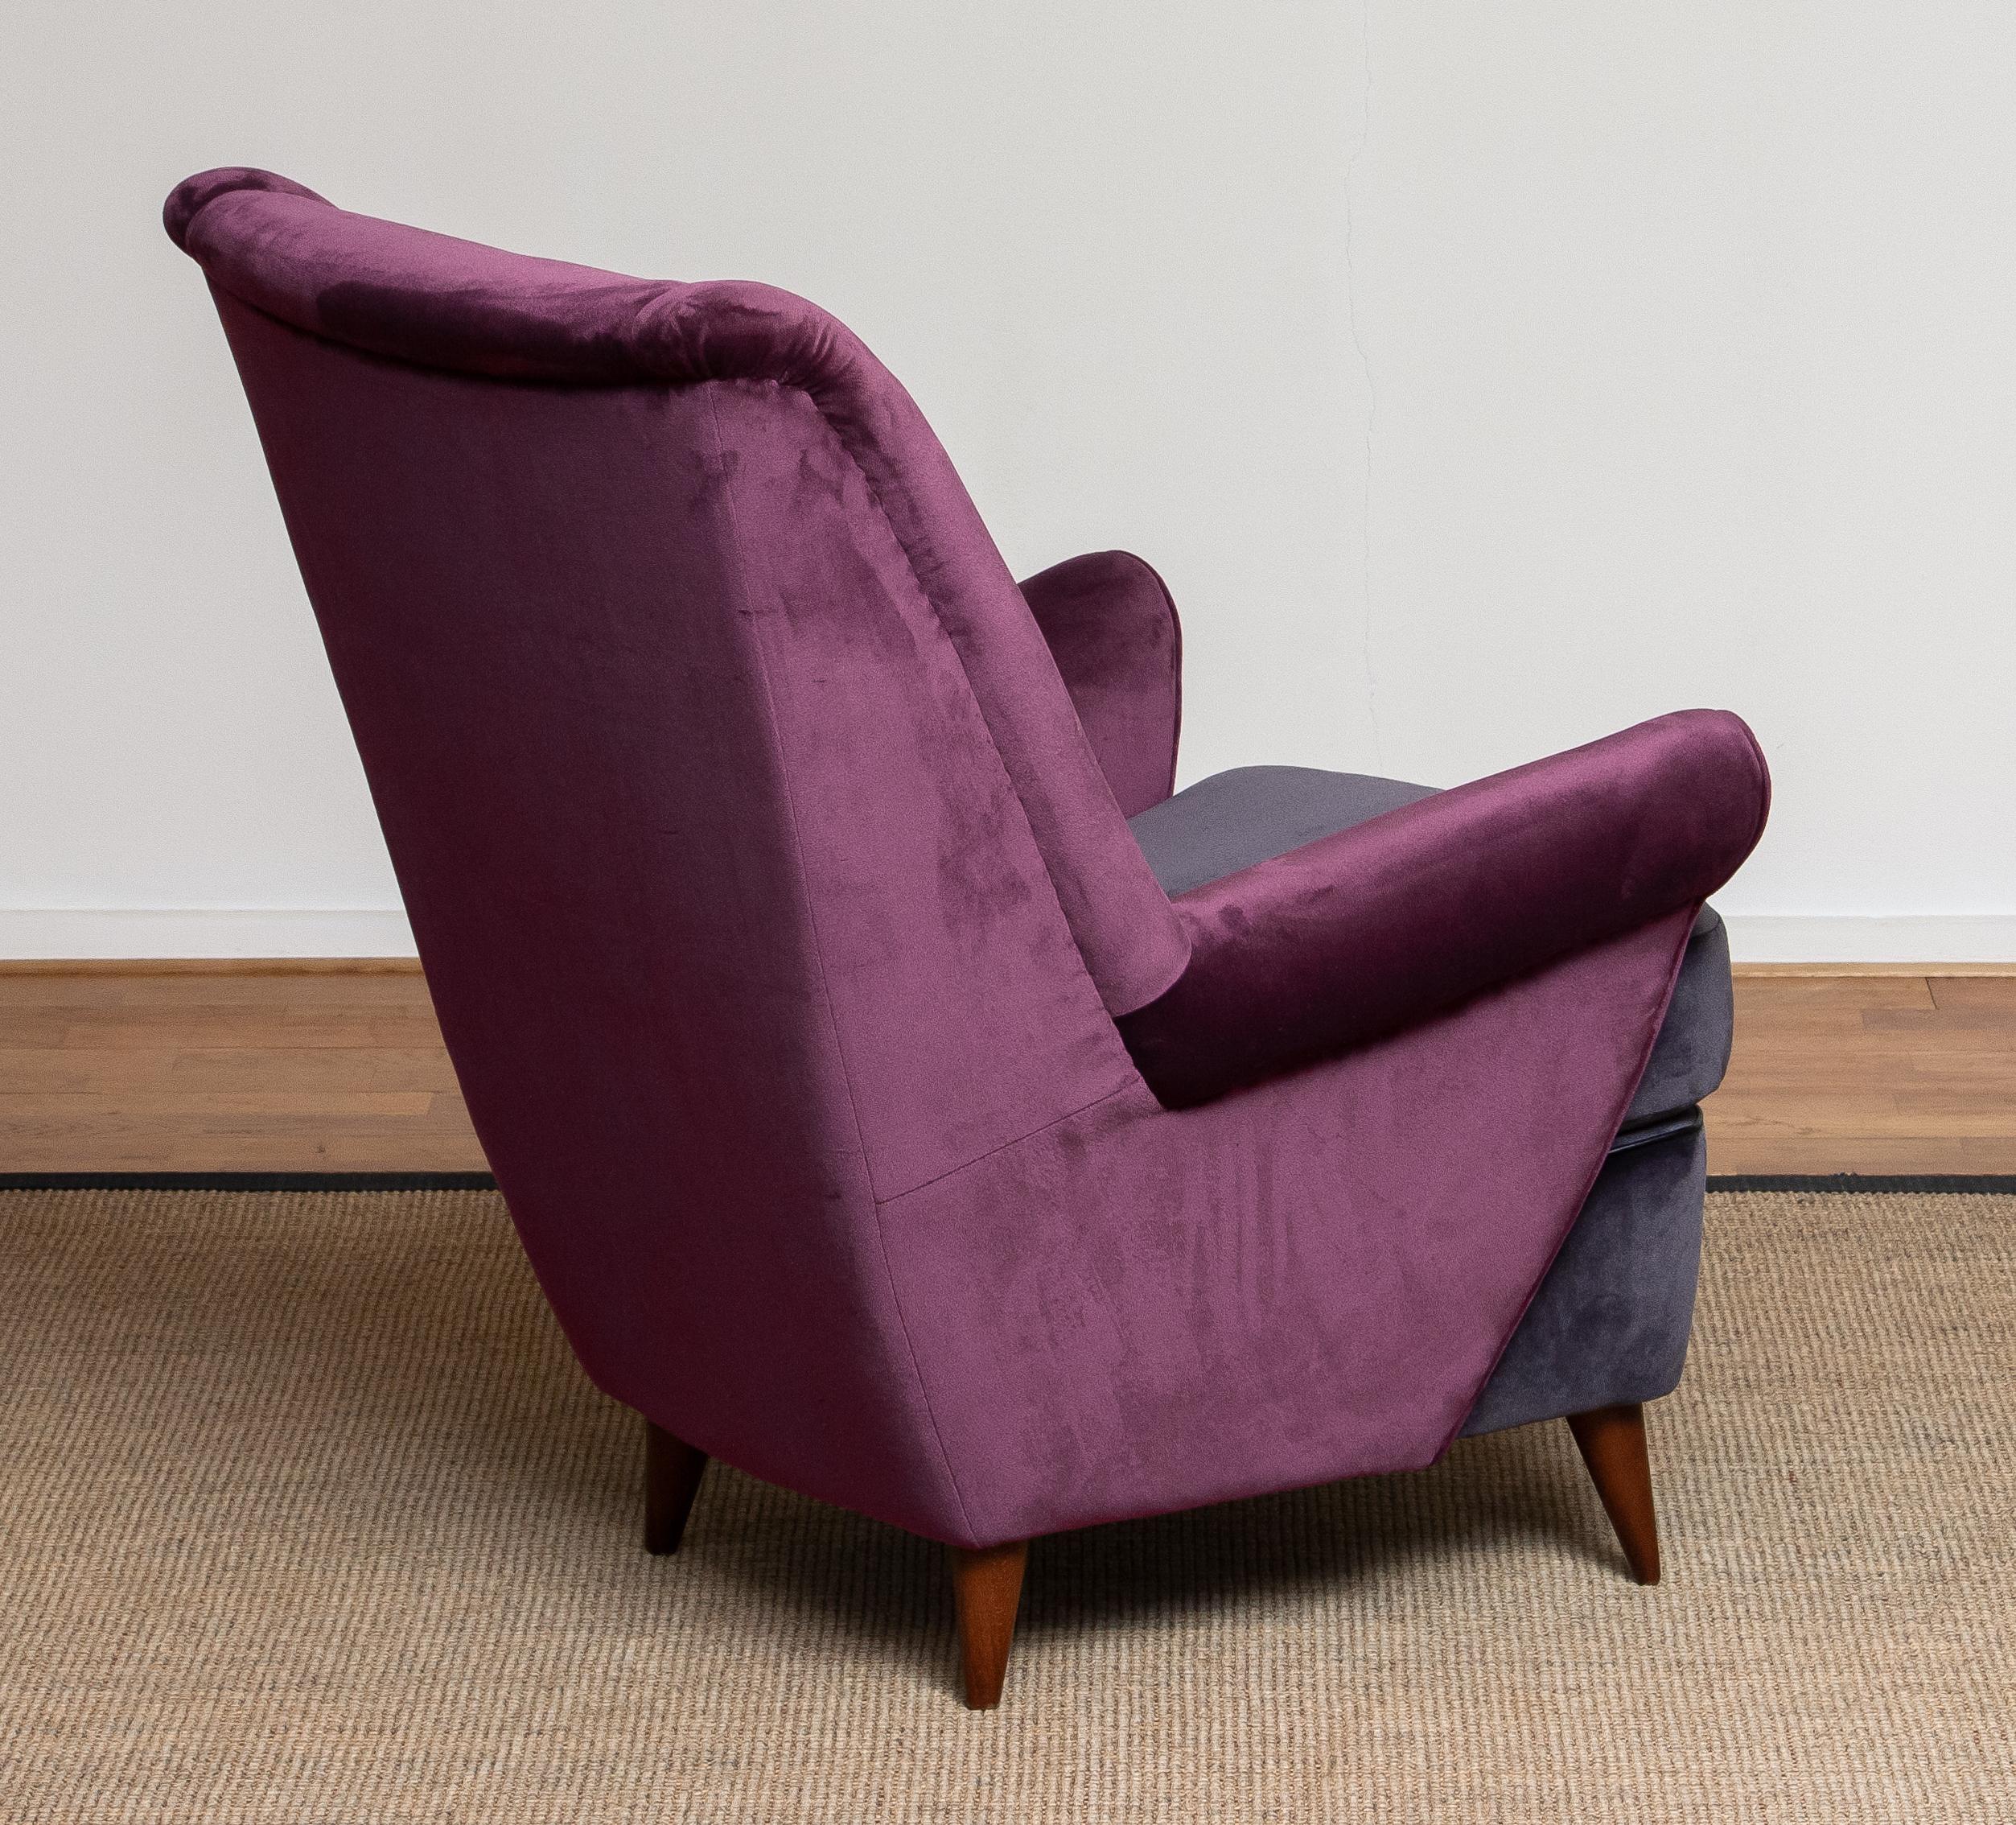 Mid-Century Modern 50's Lounge / Easy Chair in Magenta by Designed Gio Ponti for ISA Bergamo, Italy For Sale